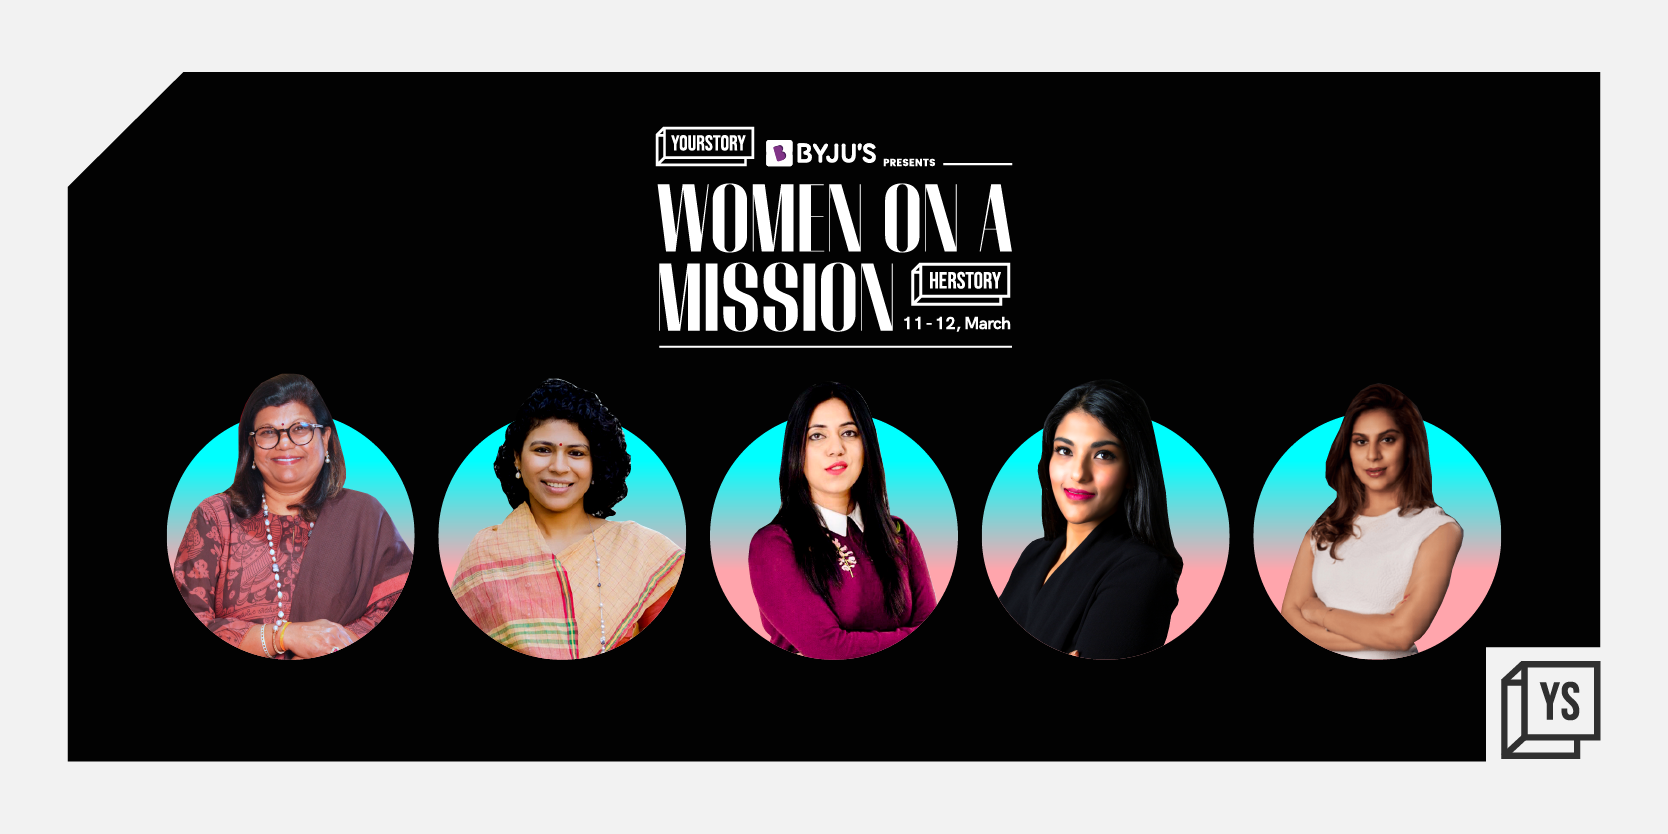 Meet Gul Panag, Dia Mirza, Capt. Zoya Agarwal, Lora H DiCarlo, among others at HerStory’s Women on a Mission 2022 